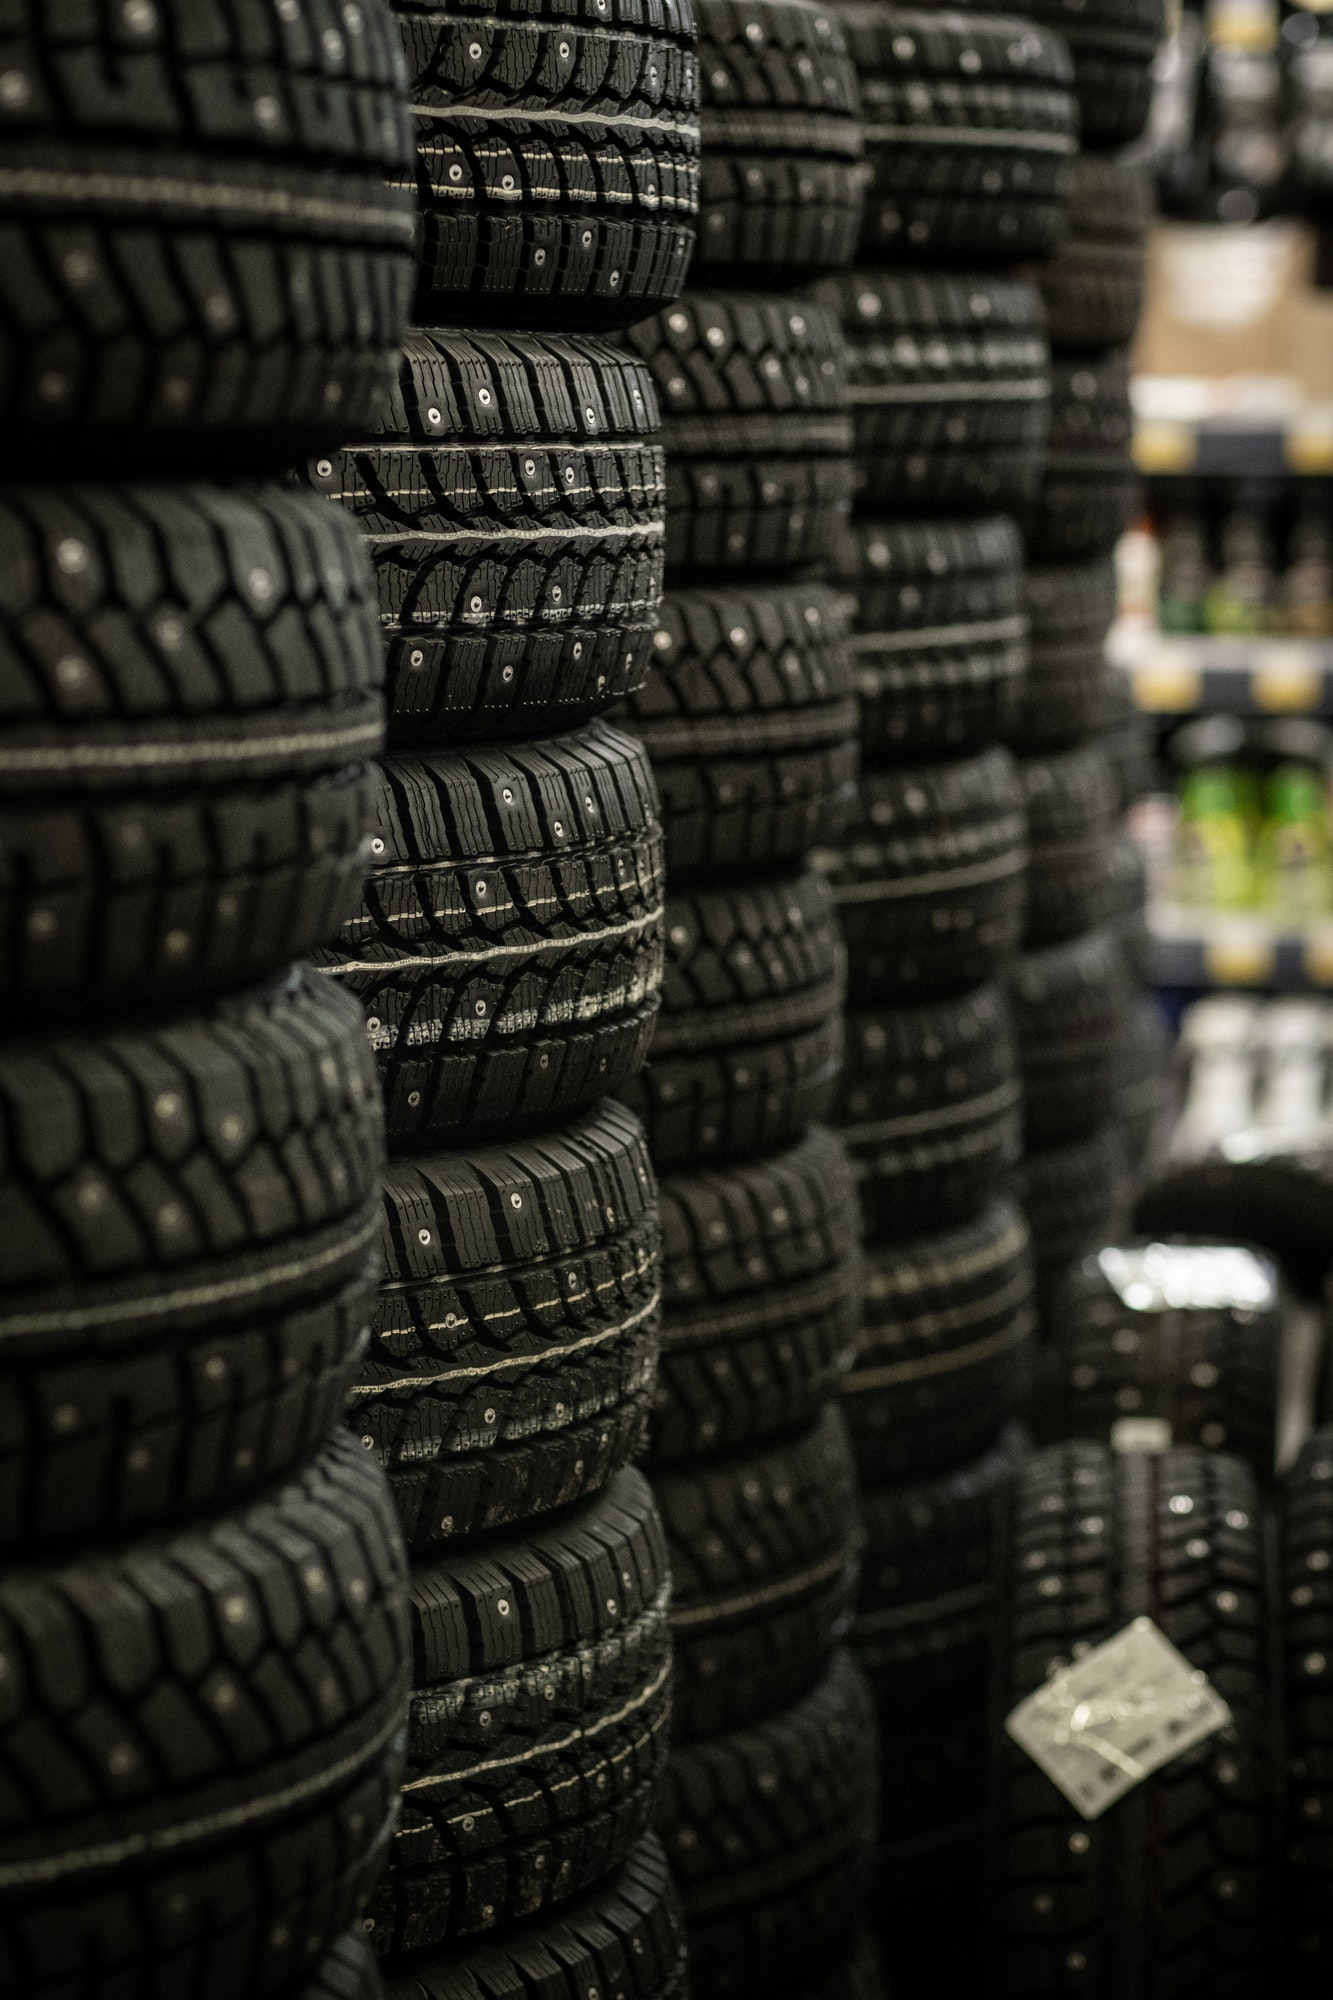 Sale of car tires for sale in the store. Many new winter tires lie